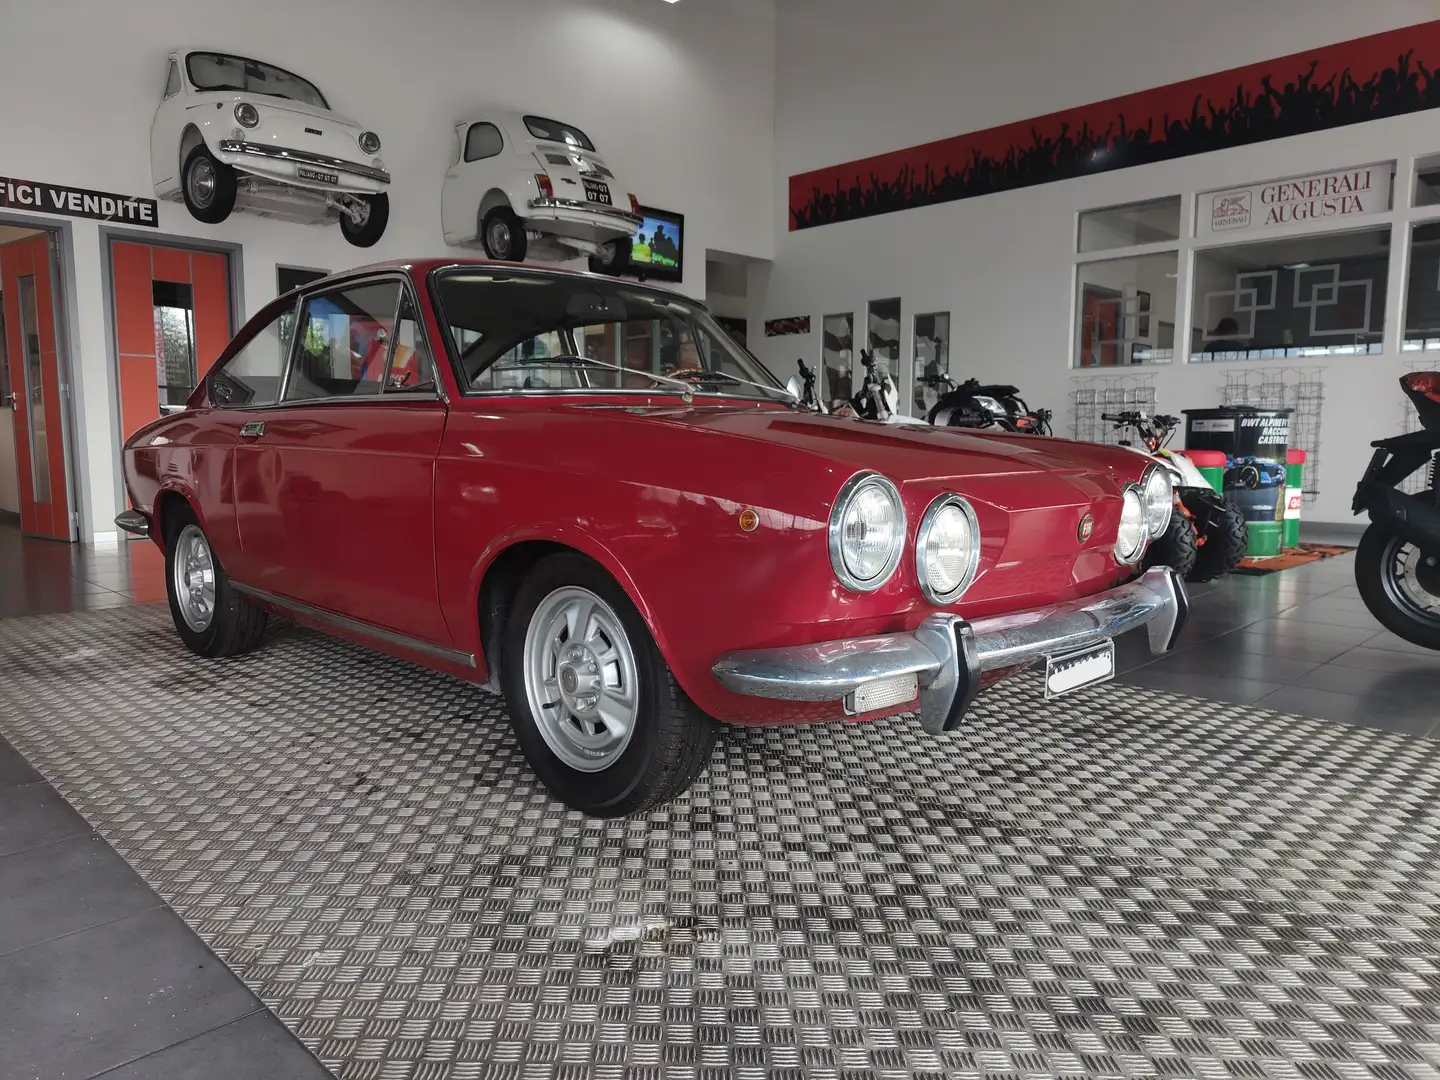 Fiat 850 SPORT COUPE' "AUTO STORICA" A.S.I Rouge - 1